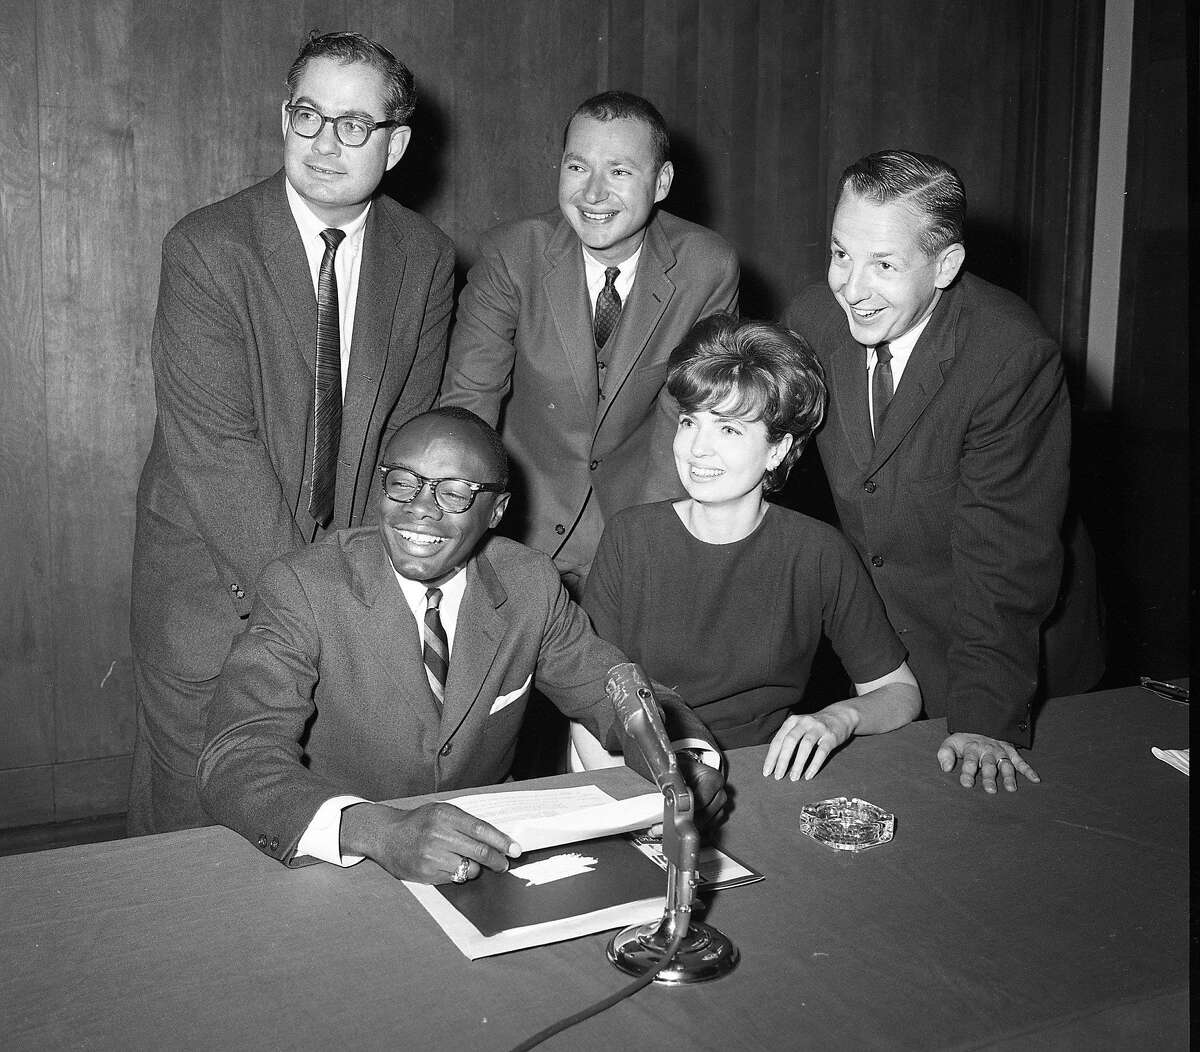 Willie Brown, candidate for state Assembly, organized an informal “cabinet” of prominent Bay Area citizens to provide him with technical information to battle the district’s problems, October 1, 1964.